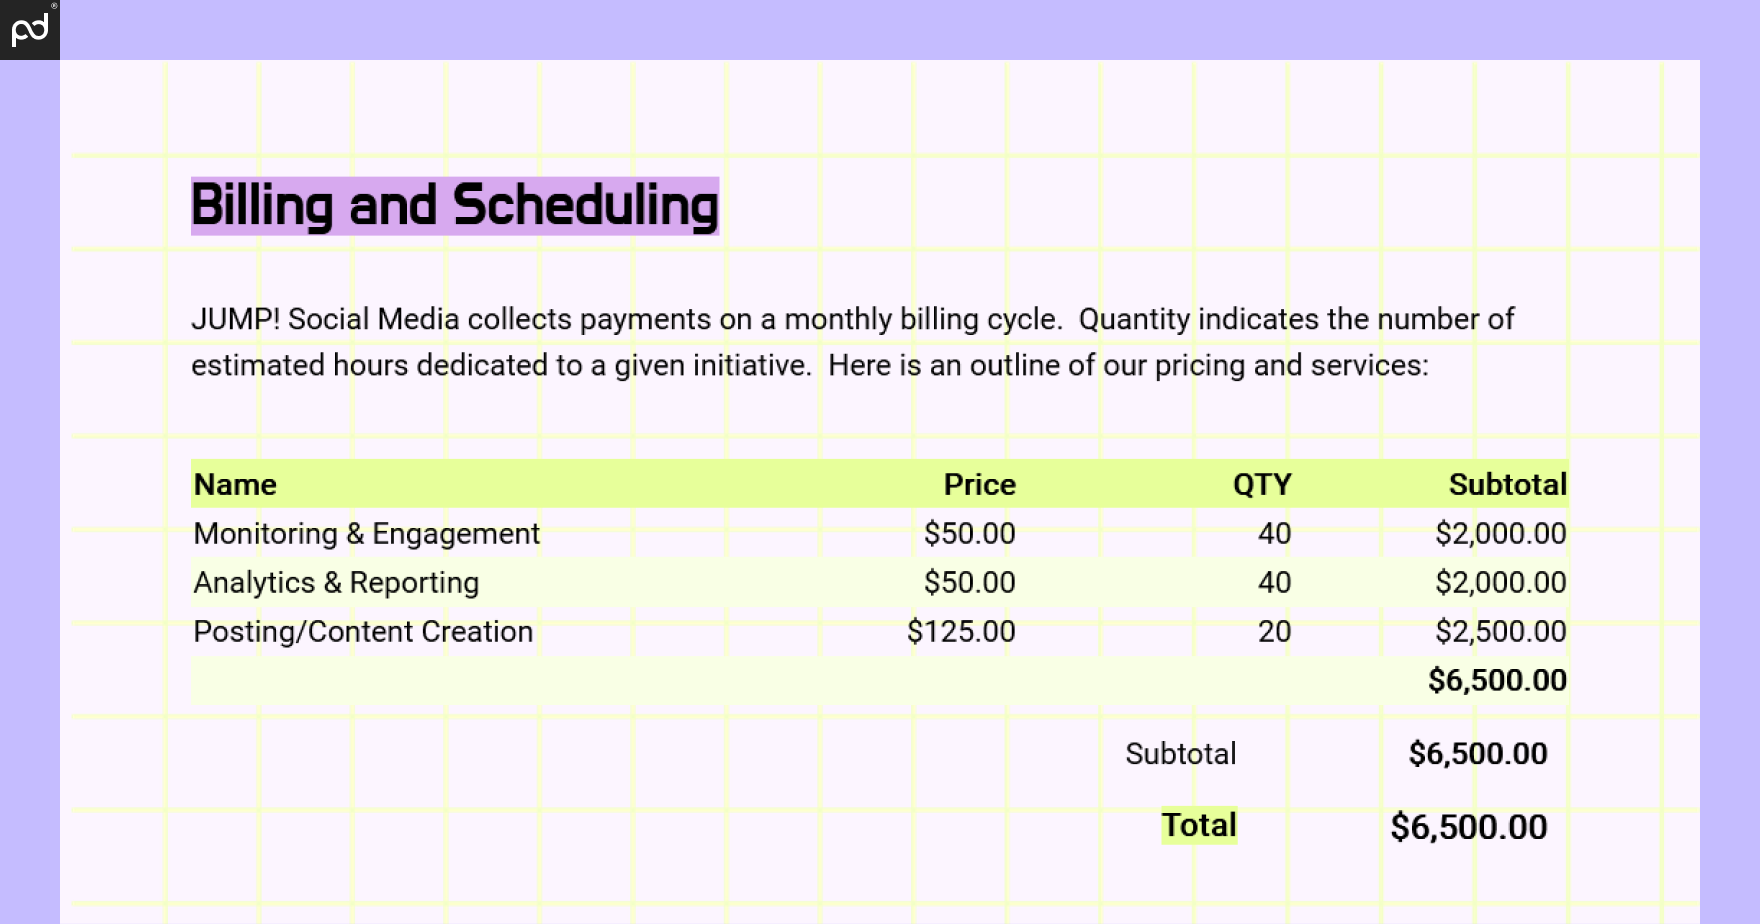 An image featuring a pricing table and a brief list of all proposed services. The table is broken down by price, quantity of work (hours), and subtotals.